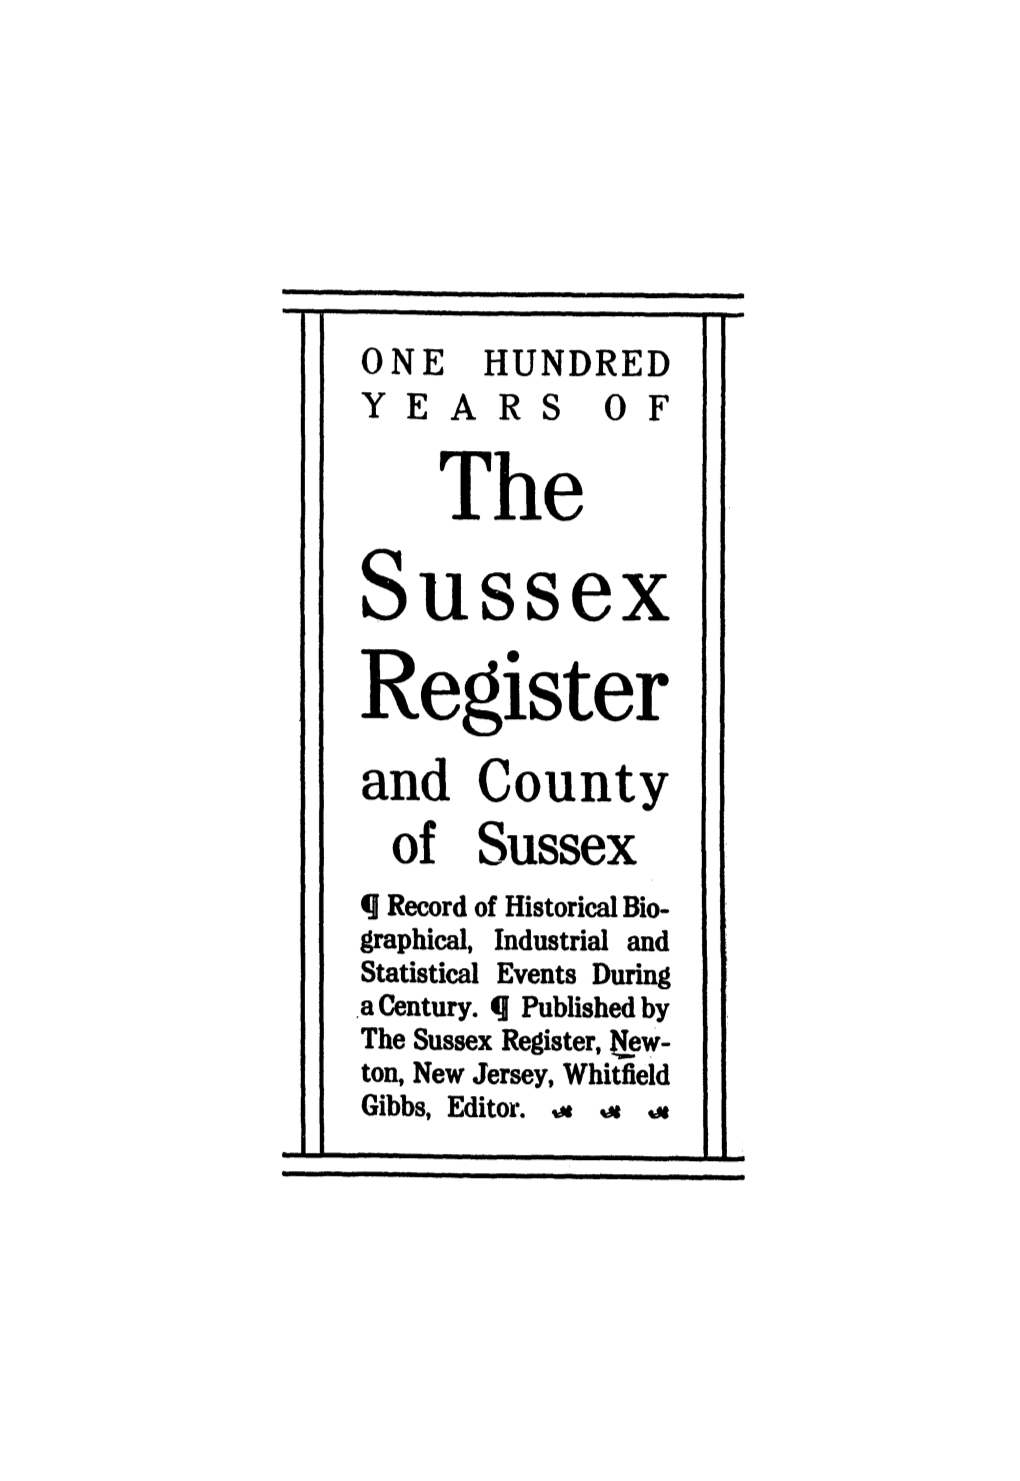 And County of Sussex (J Record of Historical Bio­ Graphical, Industrial and Statistical Events During .A Century